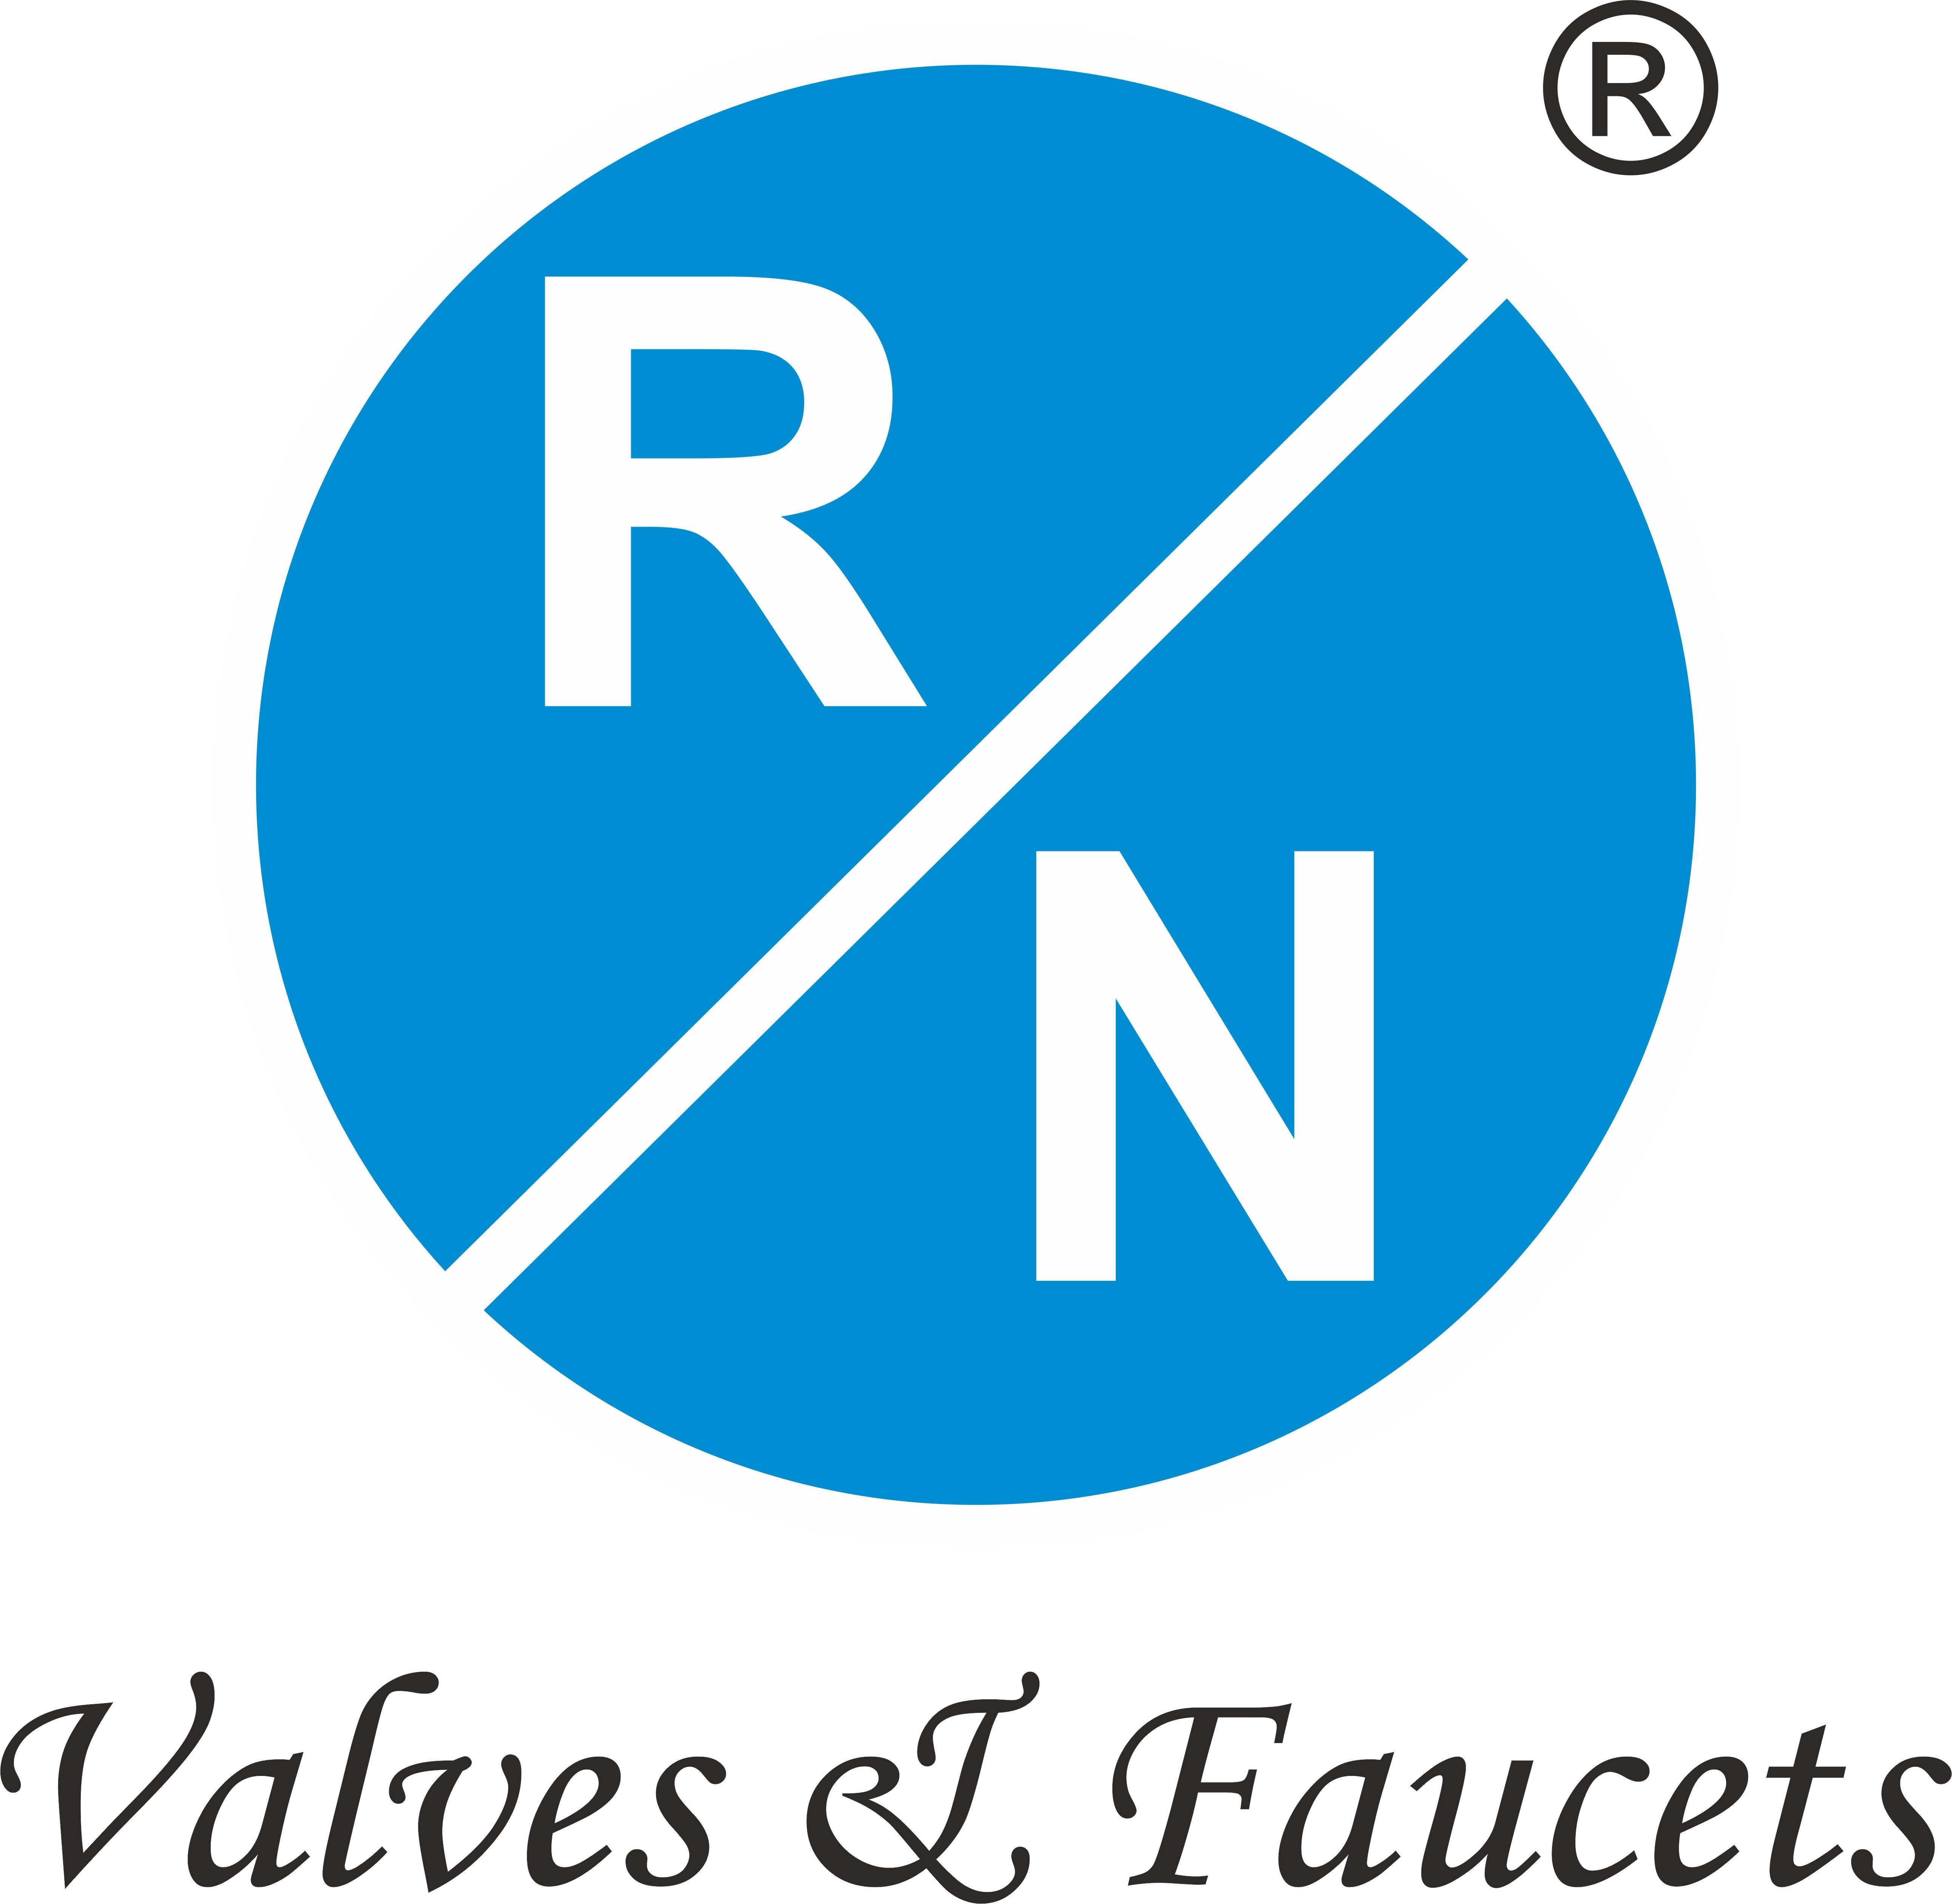 RN Valves & Faucets